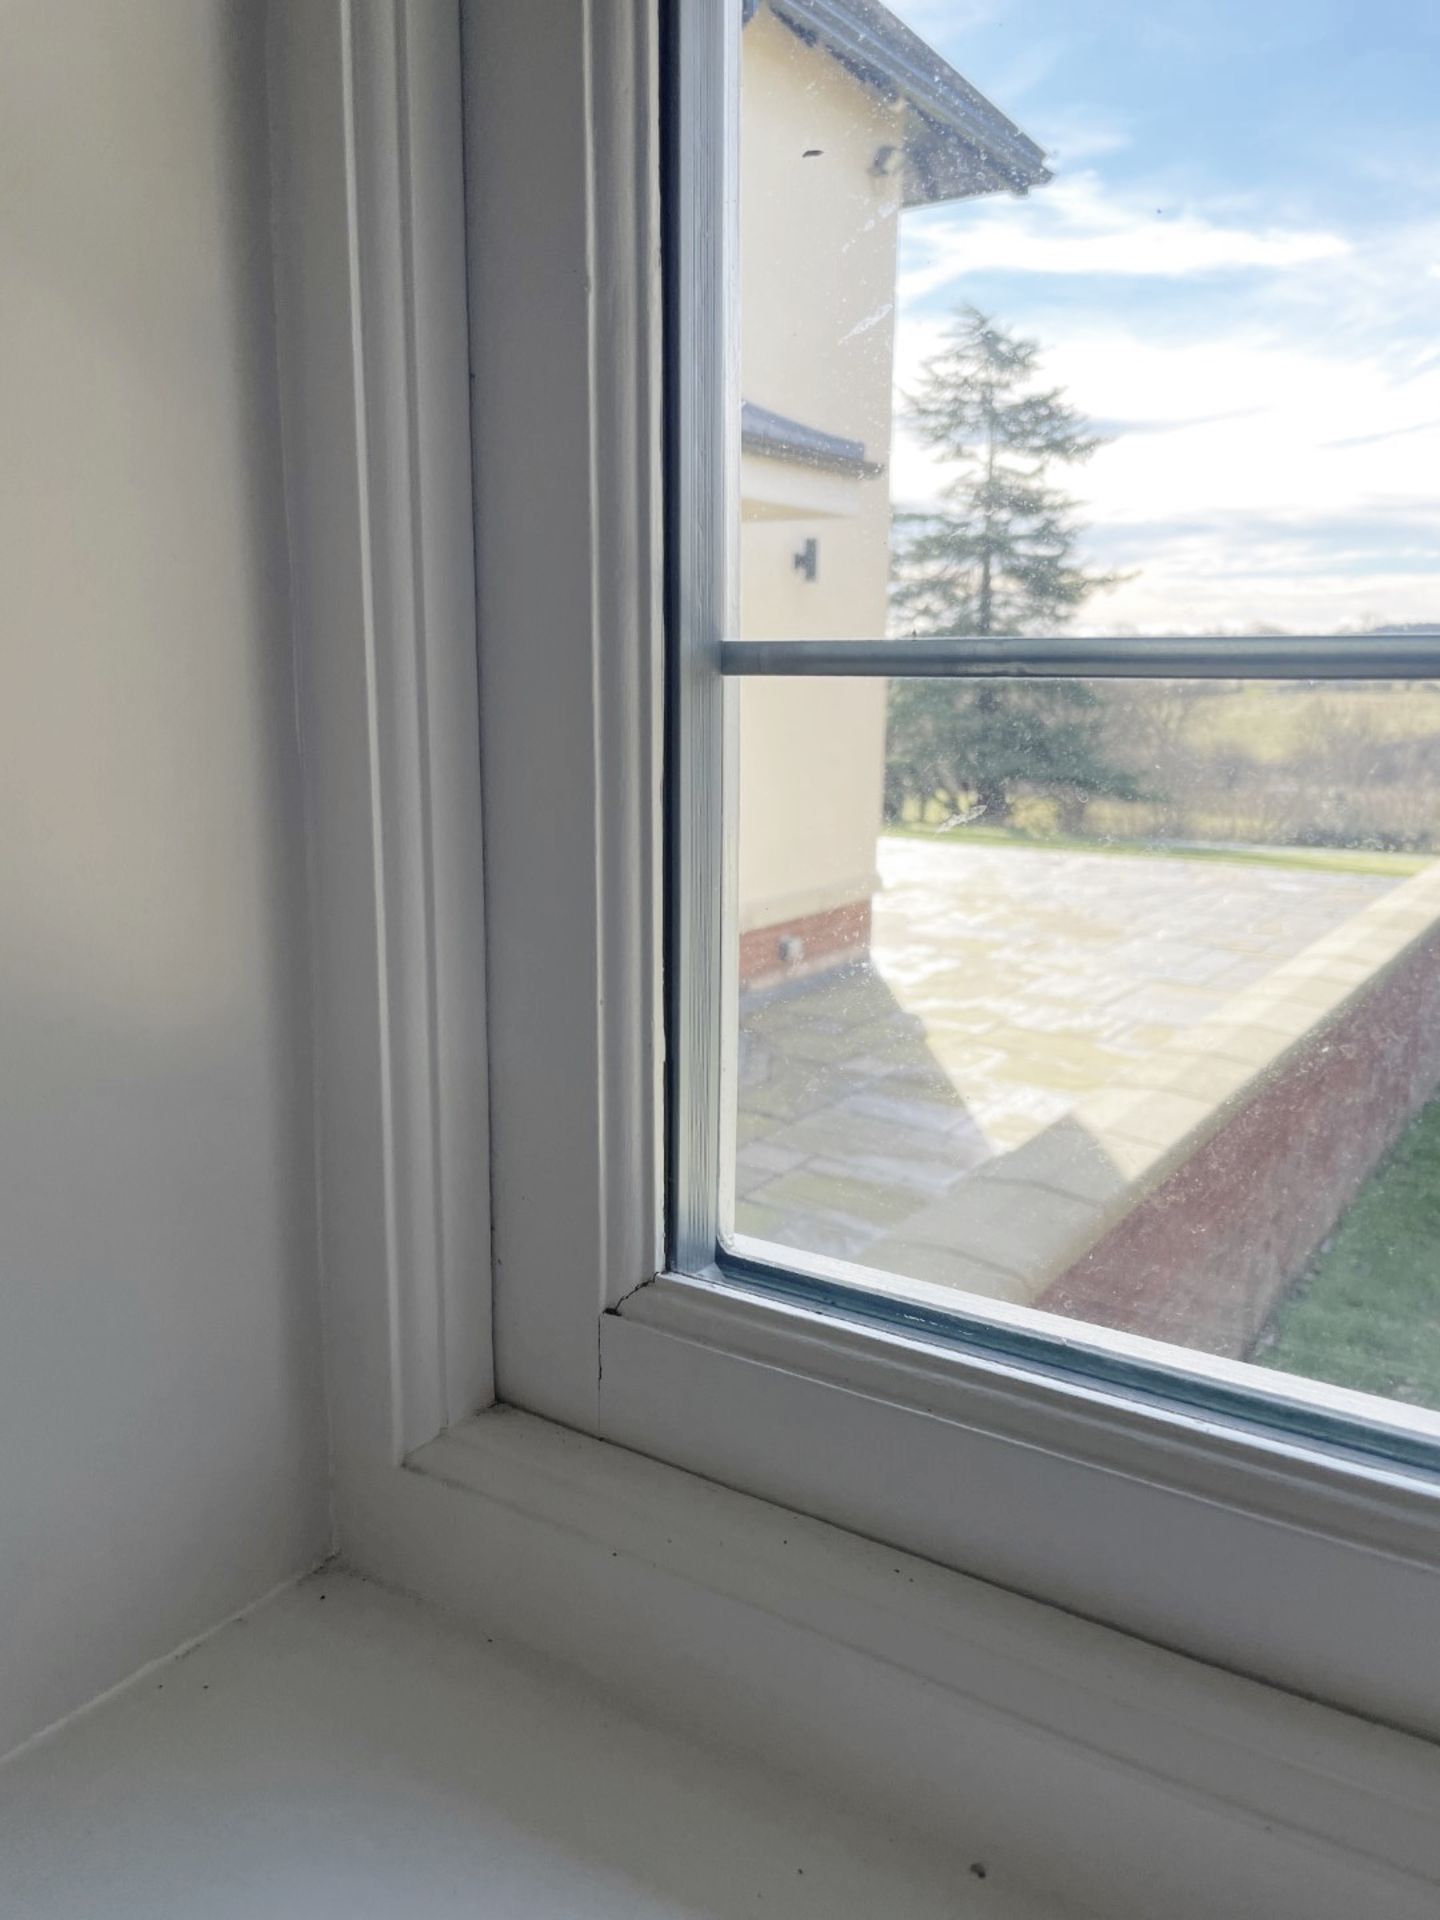 1 x Small Hardwood Timber Double Glazed Leaded Window Frame, In White - Ref: PAN205 - CL896 - NO VAT - Image 2 of 7